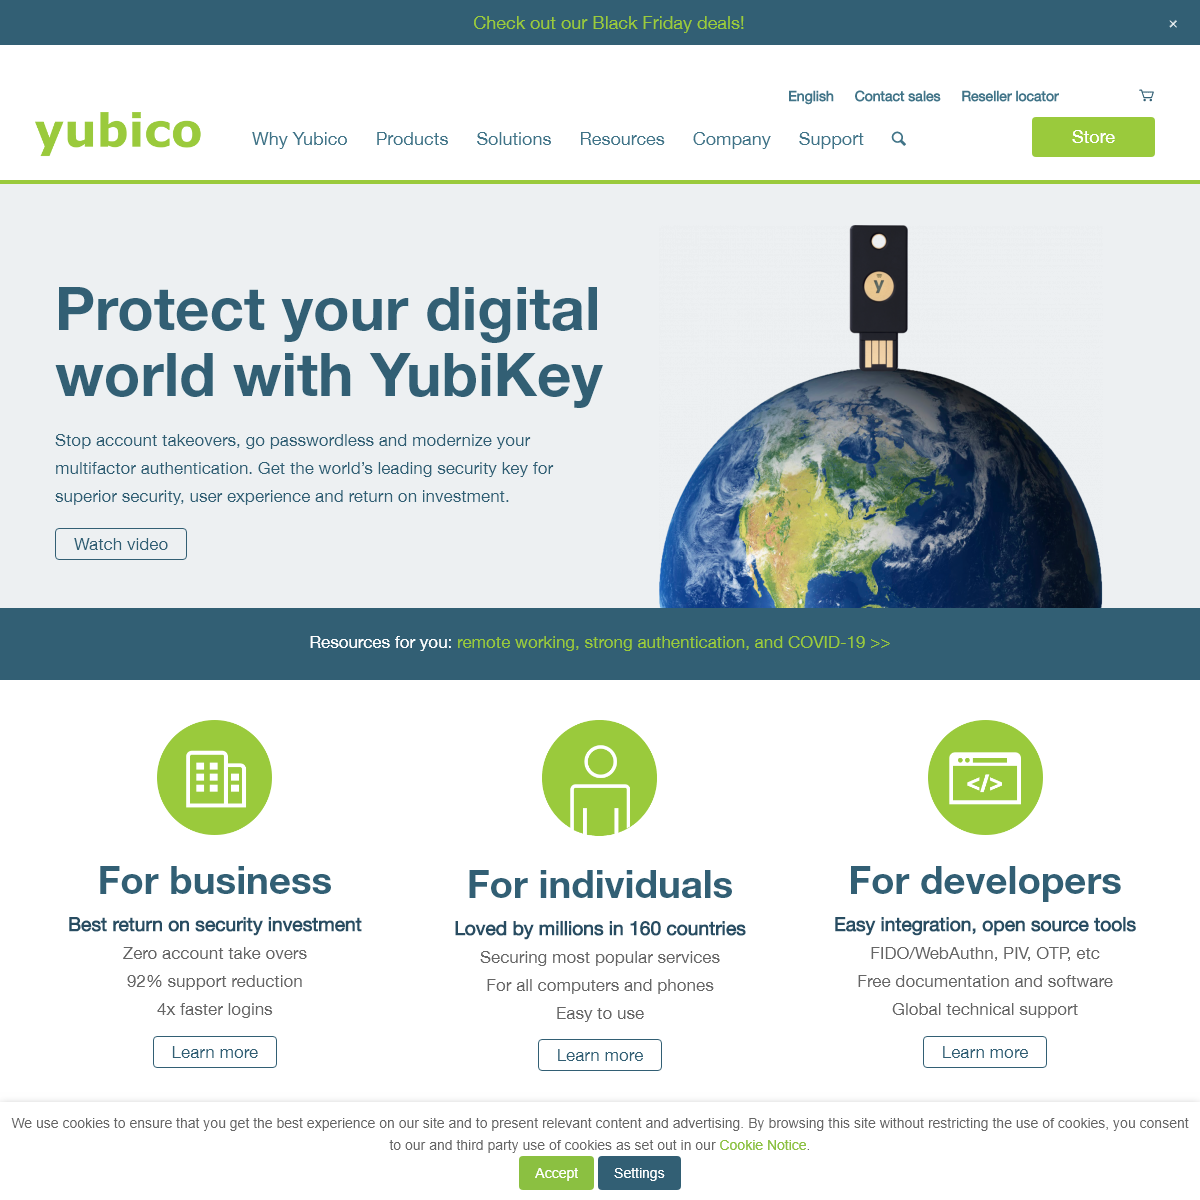 A complete backup of yubico.com